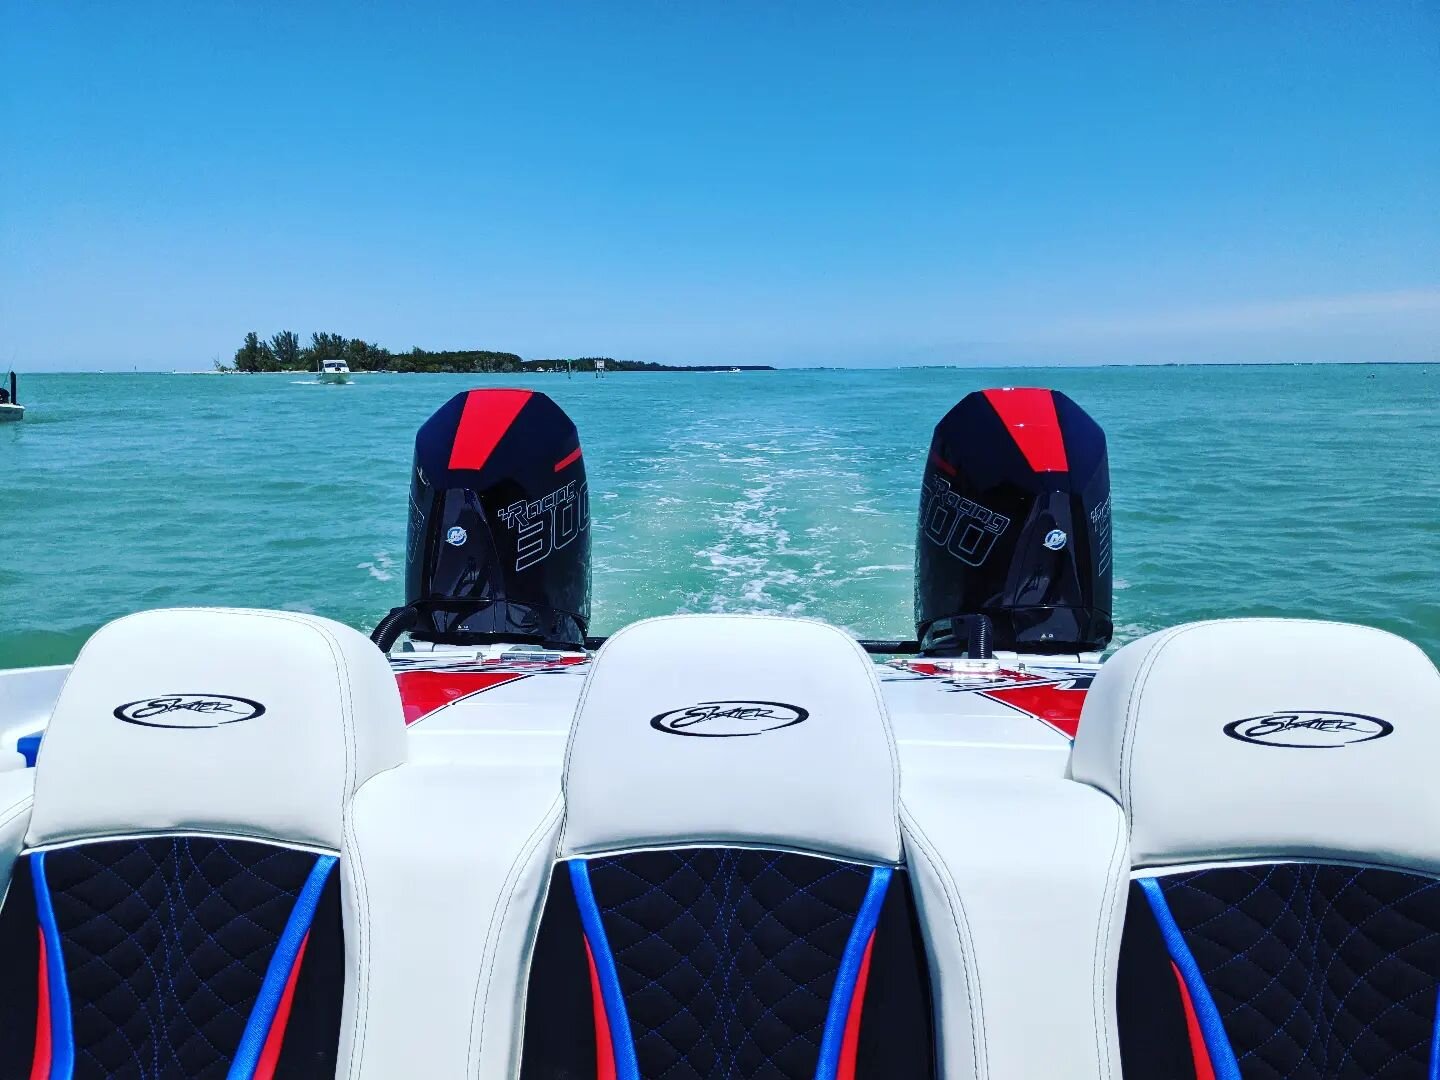 Skater + Mercury Racing is a winning combination. 
#wavetowave #fastboats #skaterpowerboats #mercuryracing #wideopen #50yearswideopen